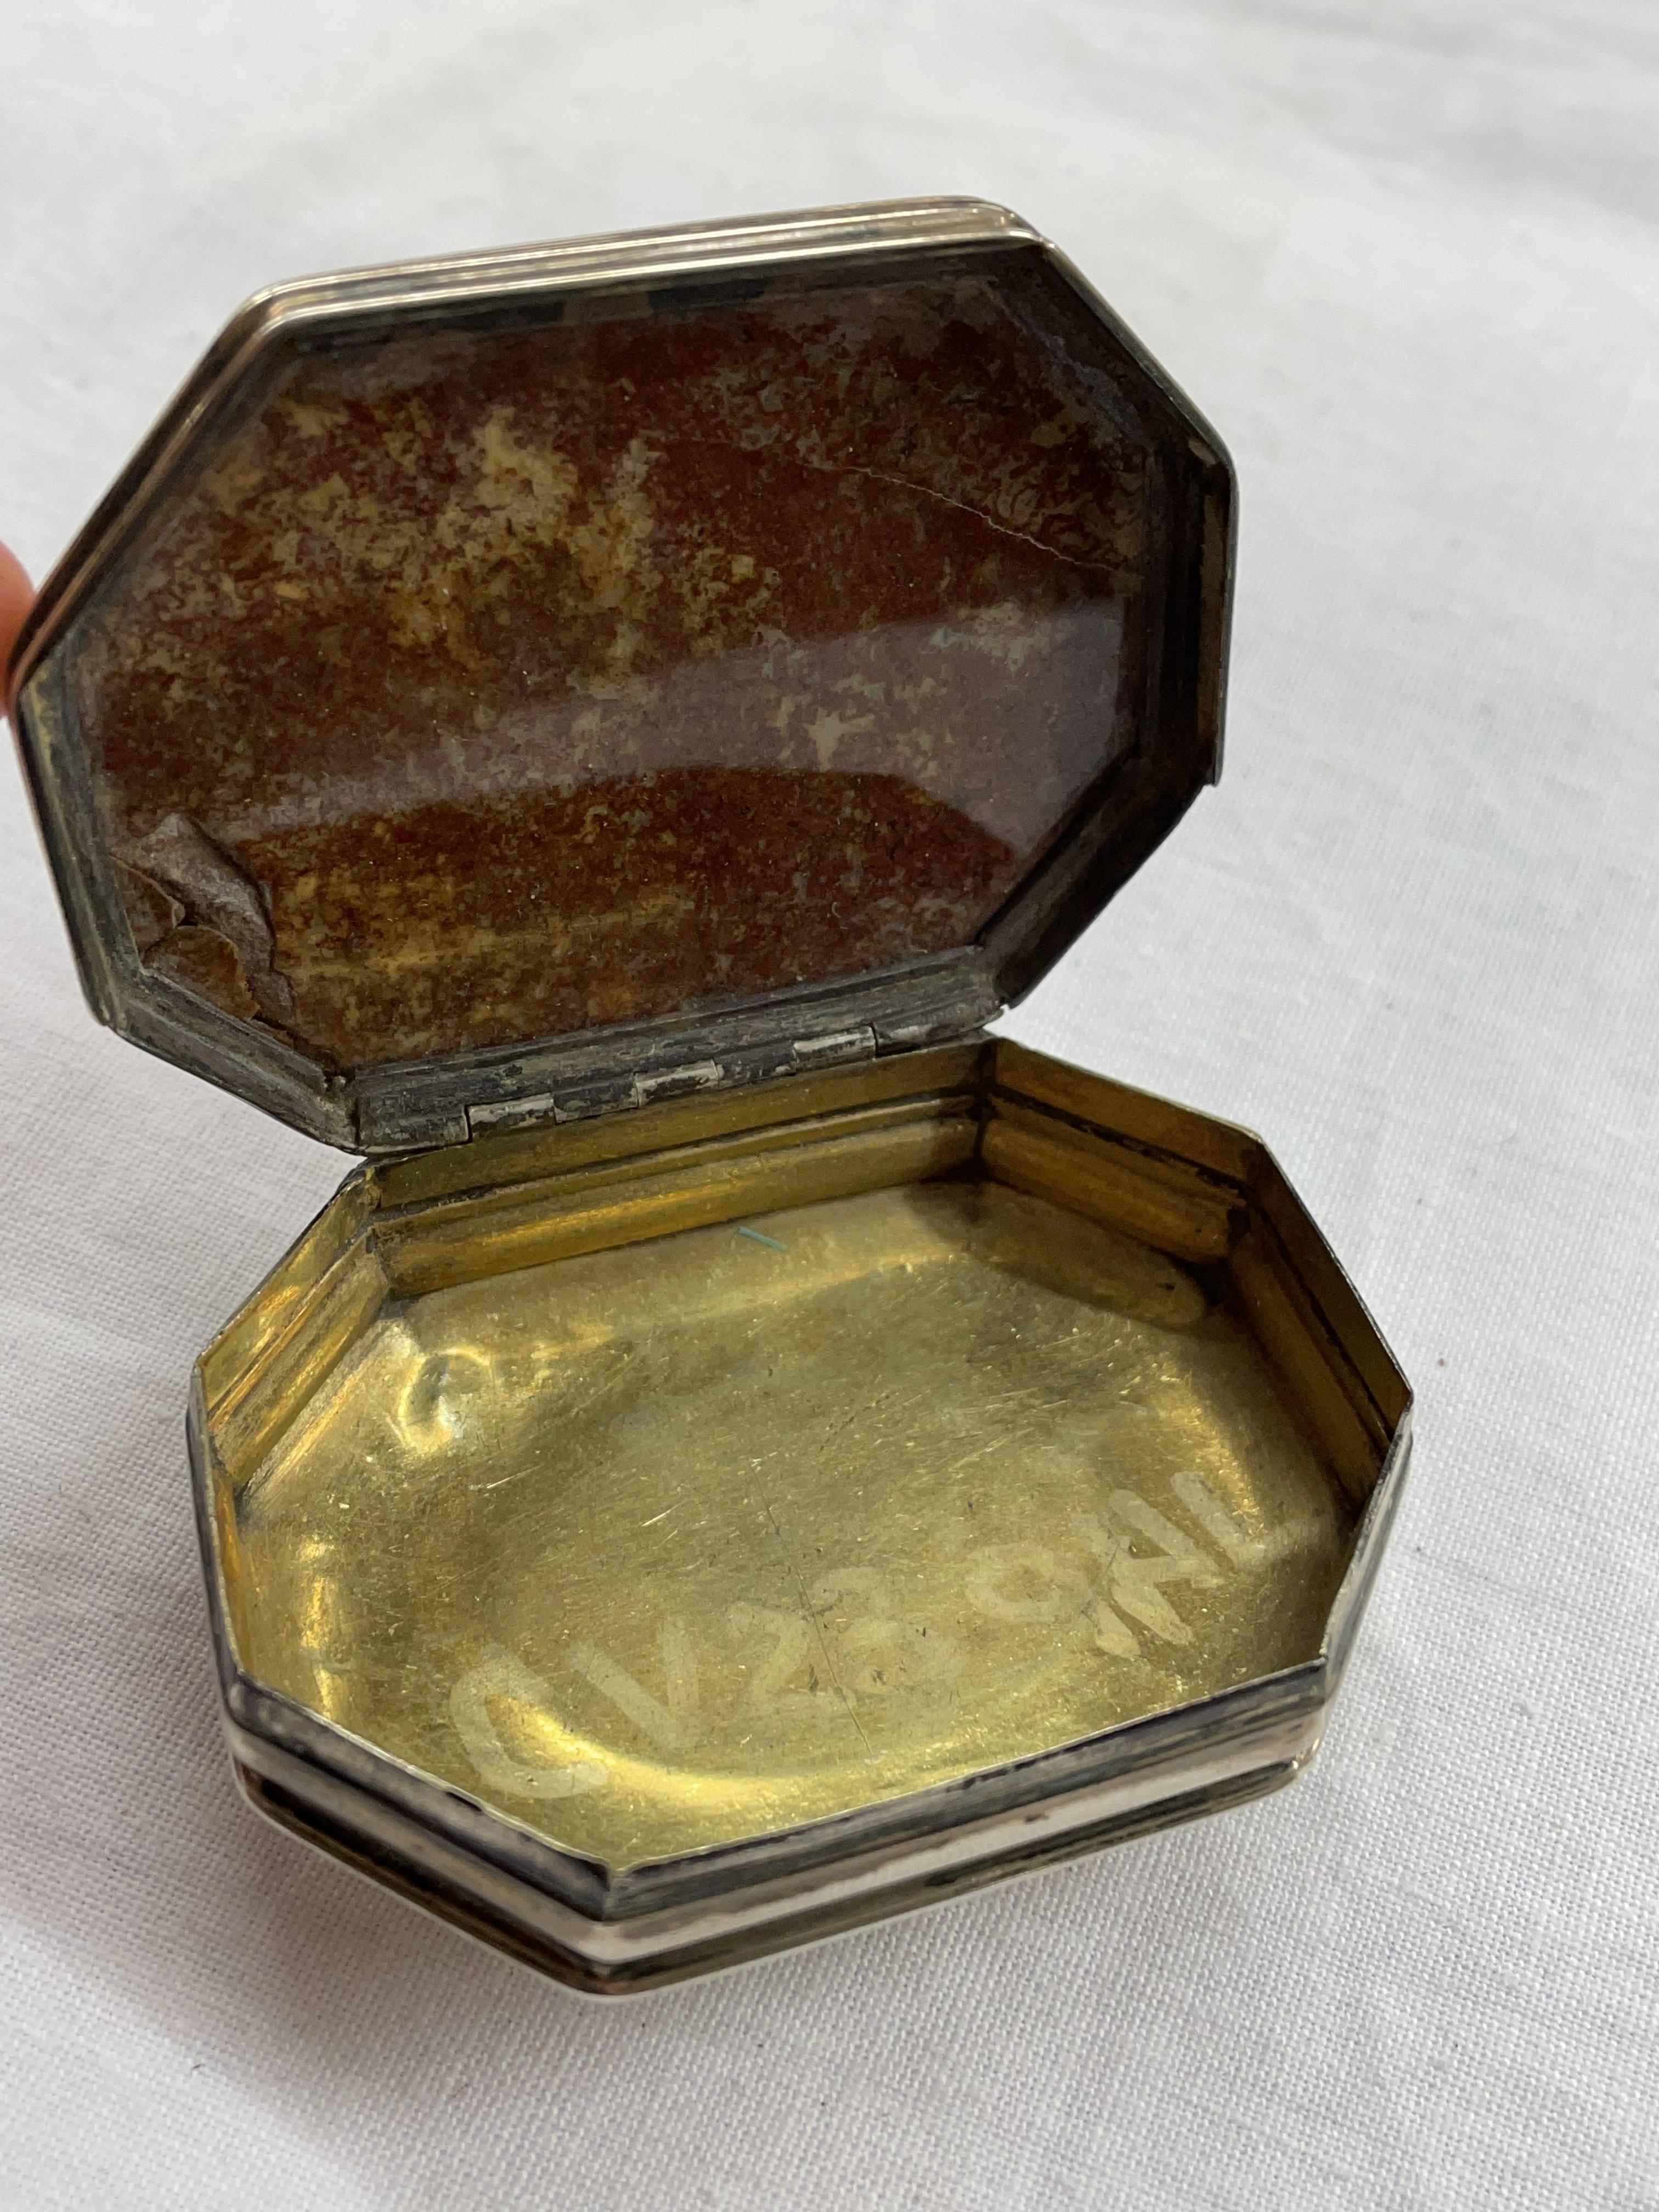 UNMARKED WHITE METAL OCTAGONAL SHAPE SNUFF BOX WITH AGATE LID - Image 3 of 3